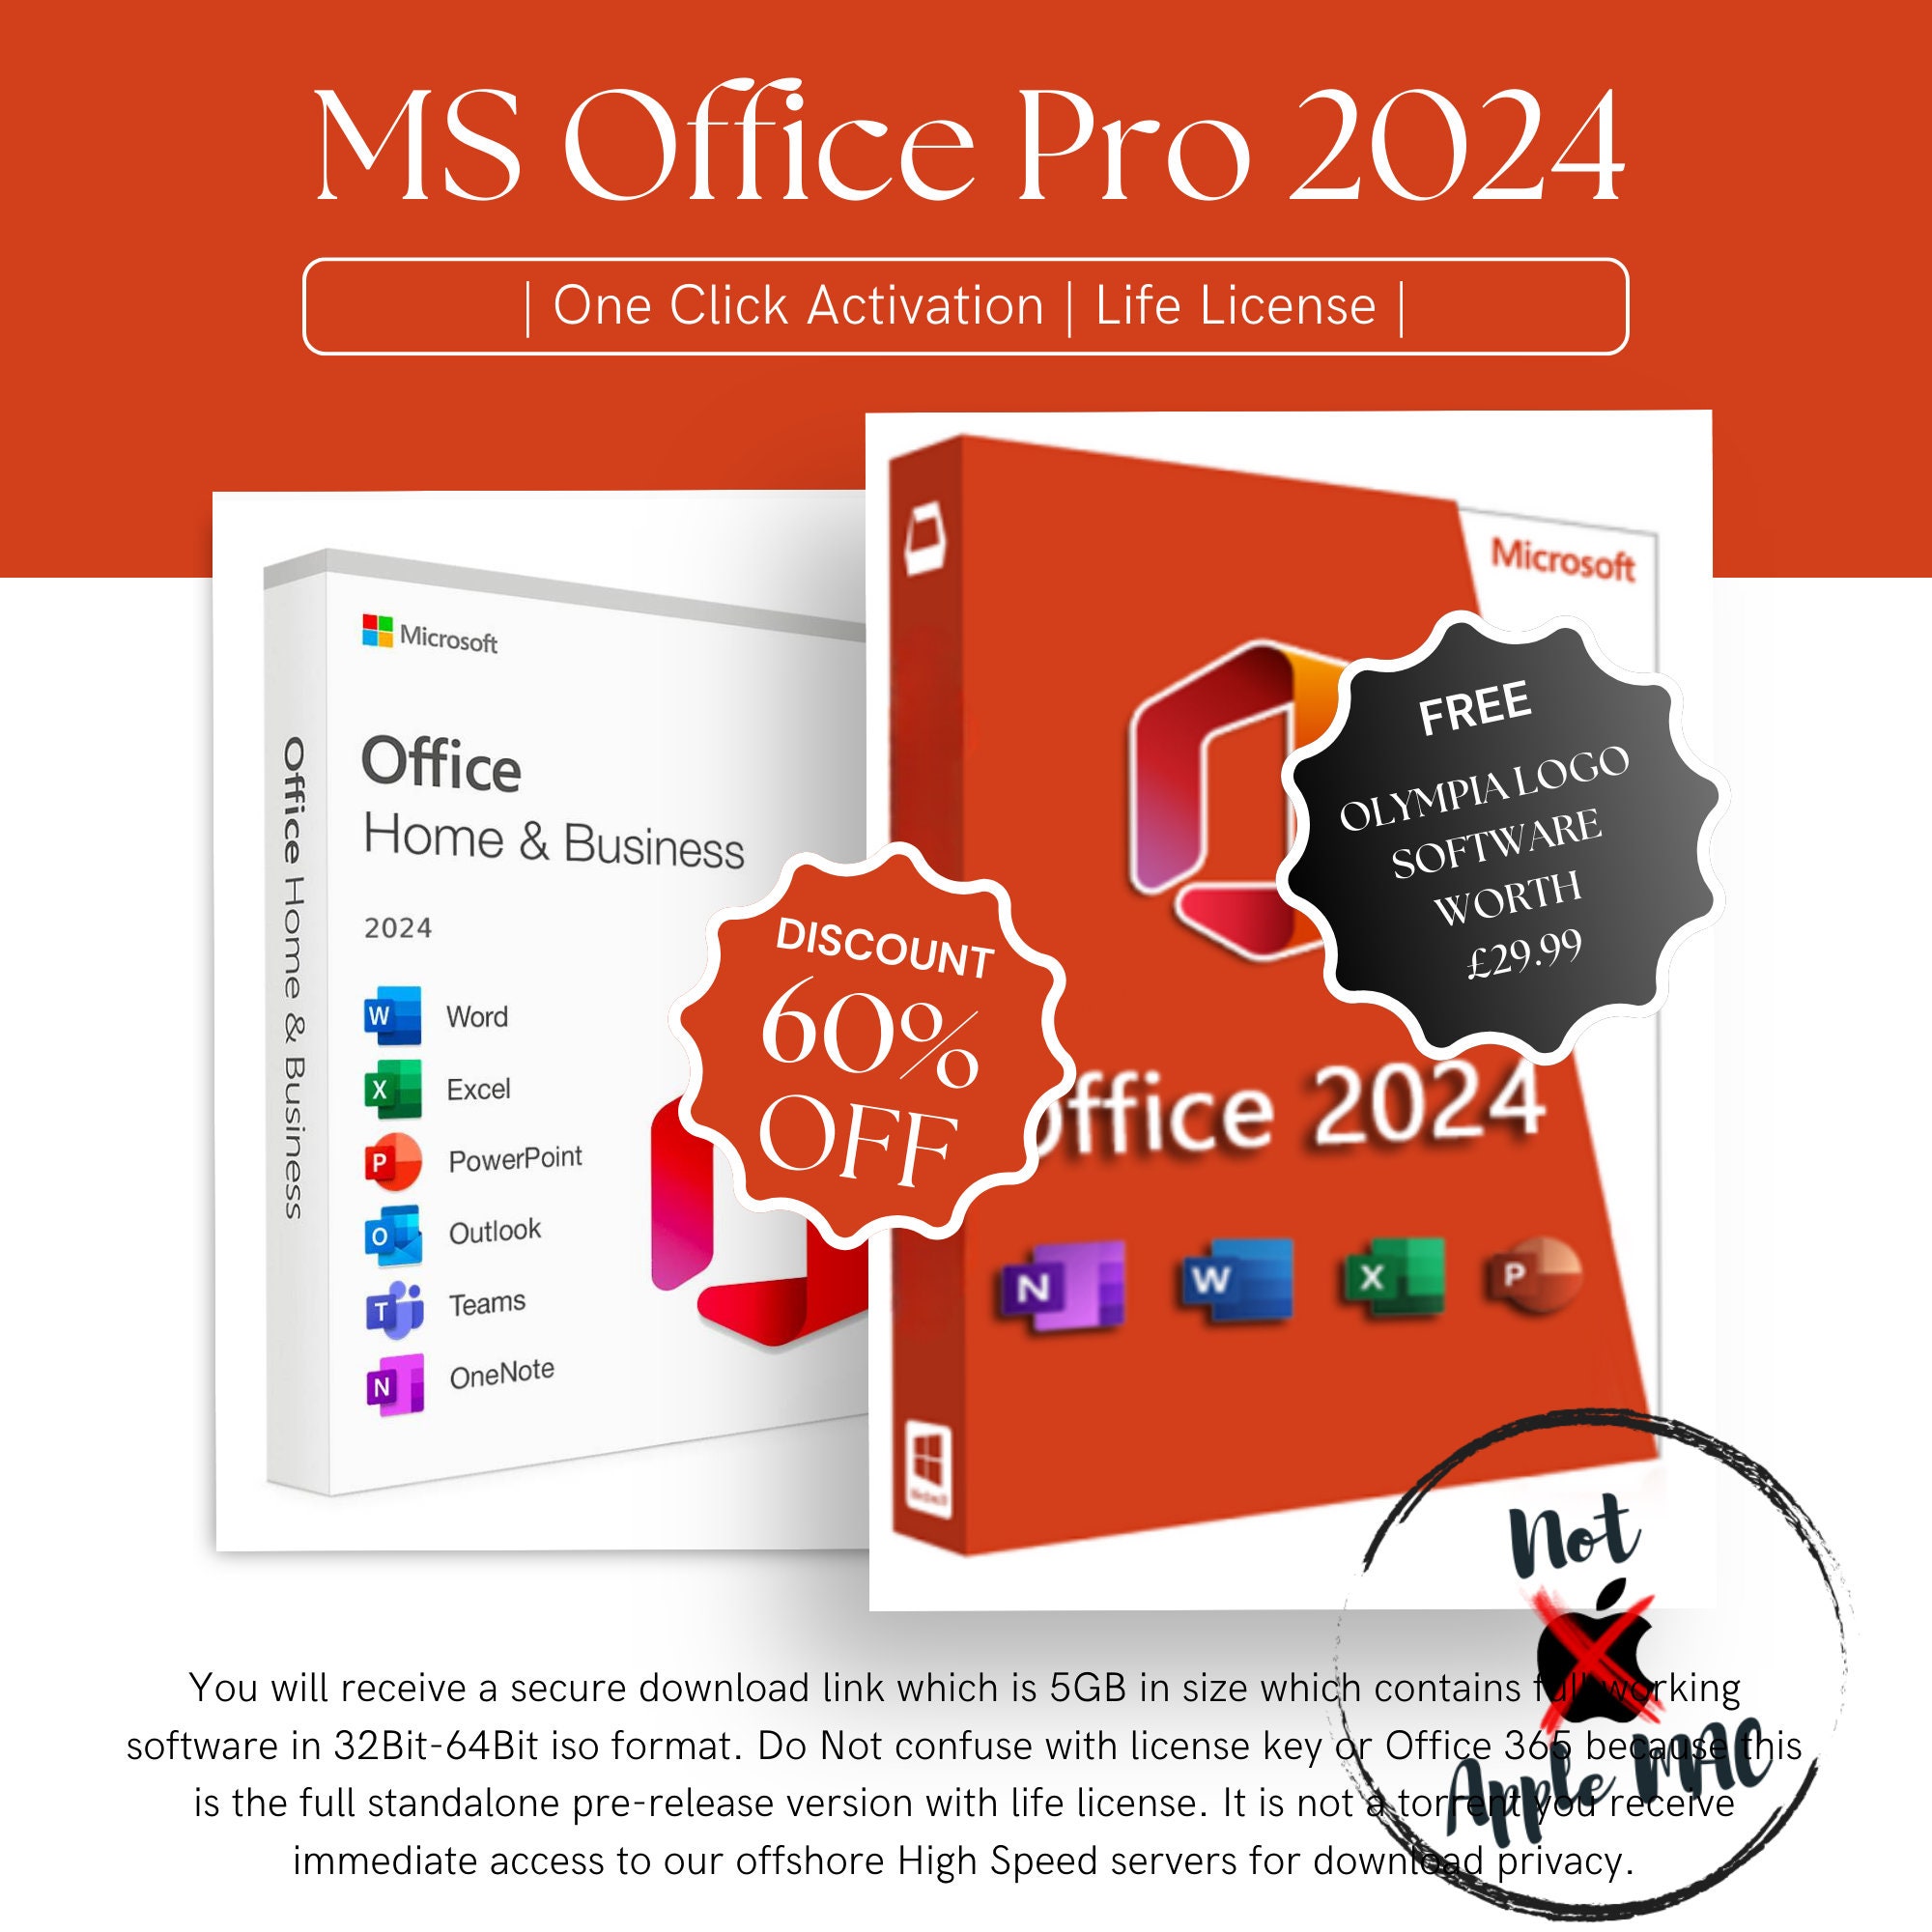 How to try Microsoft Office 2024 right now